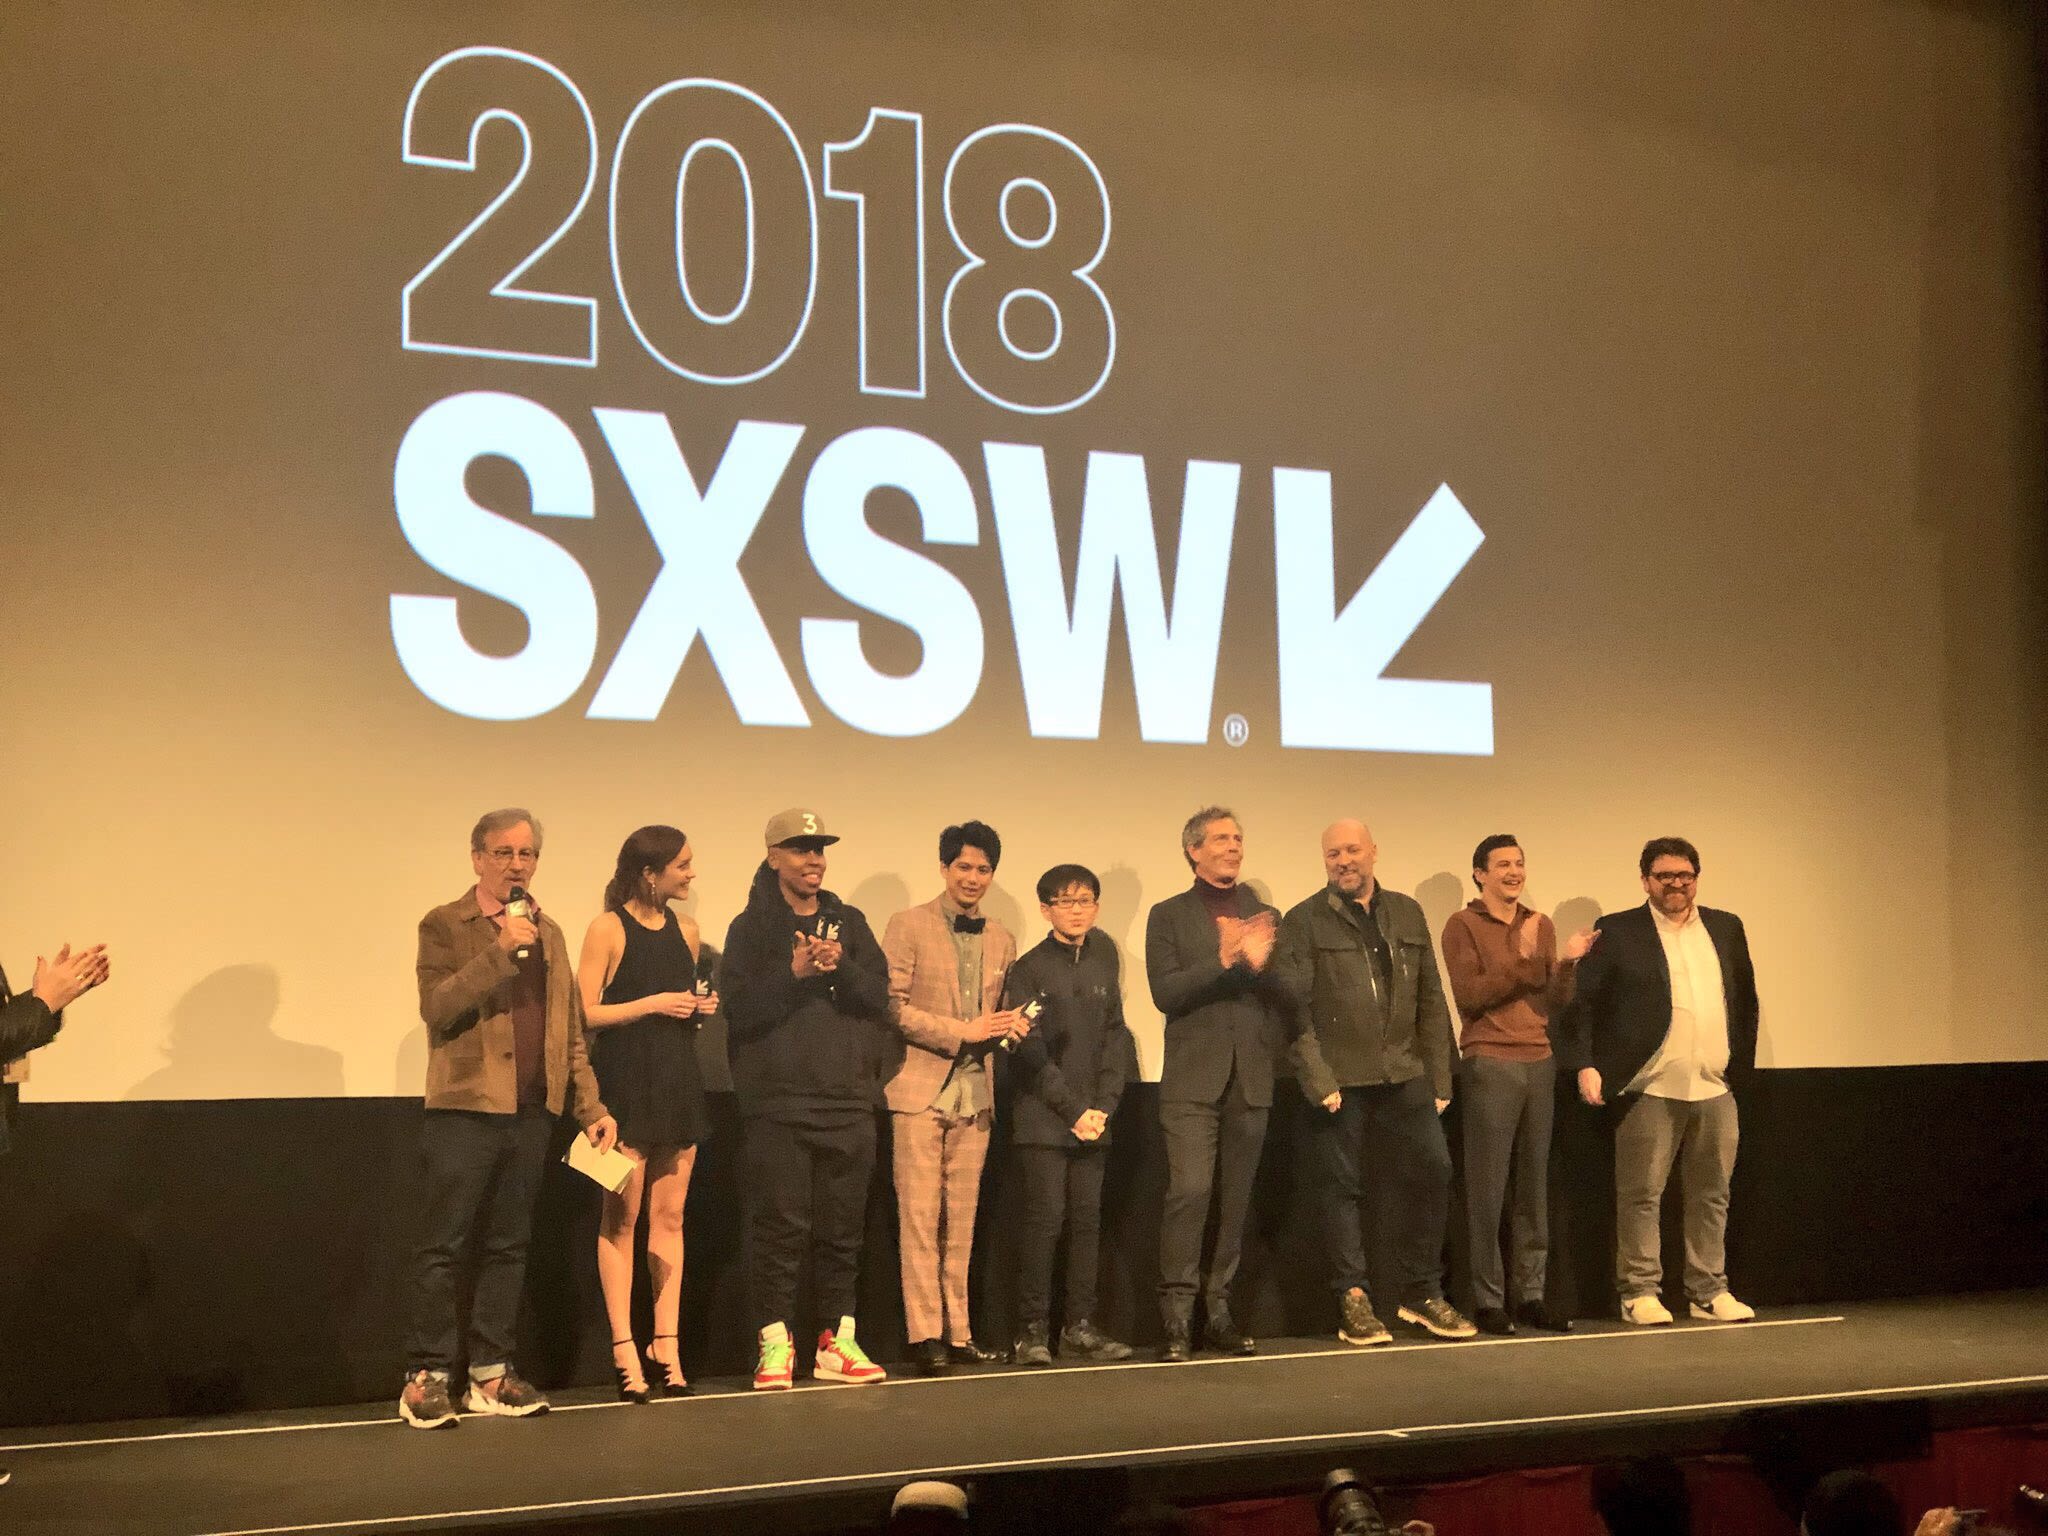 Ready Player One LIVE at SXSW, powered by Twitch and IMDb